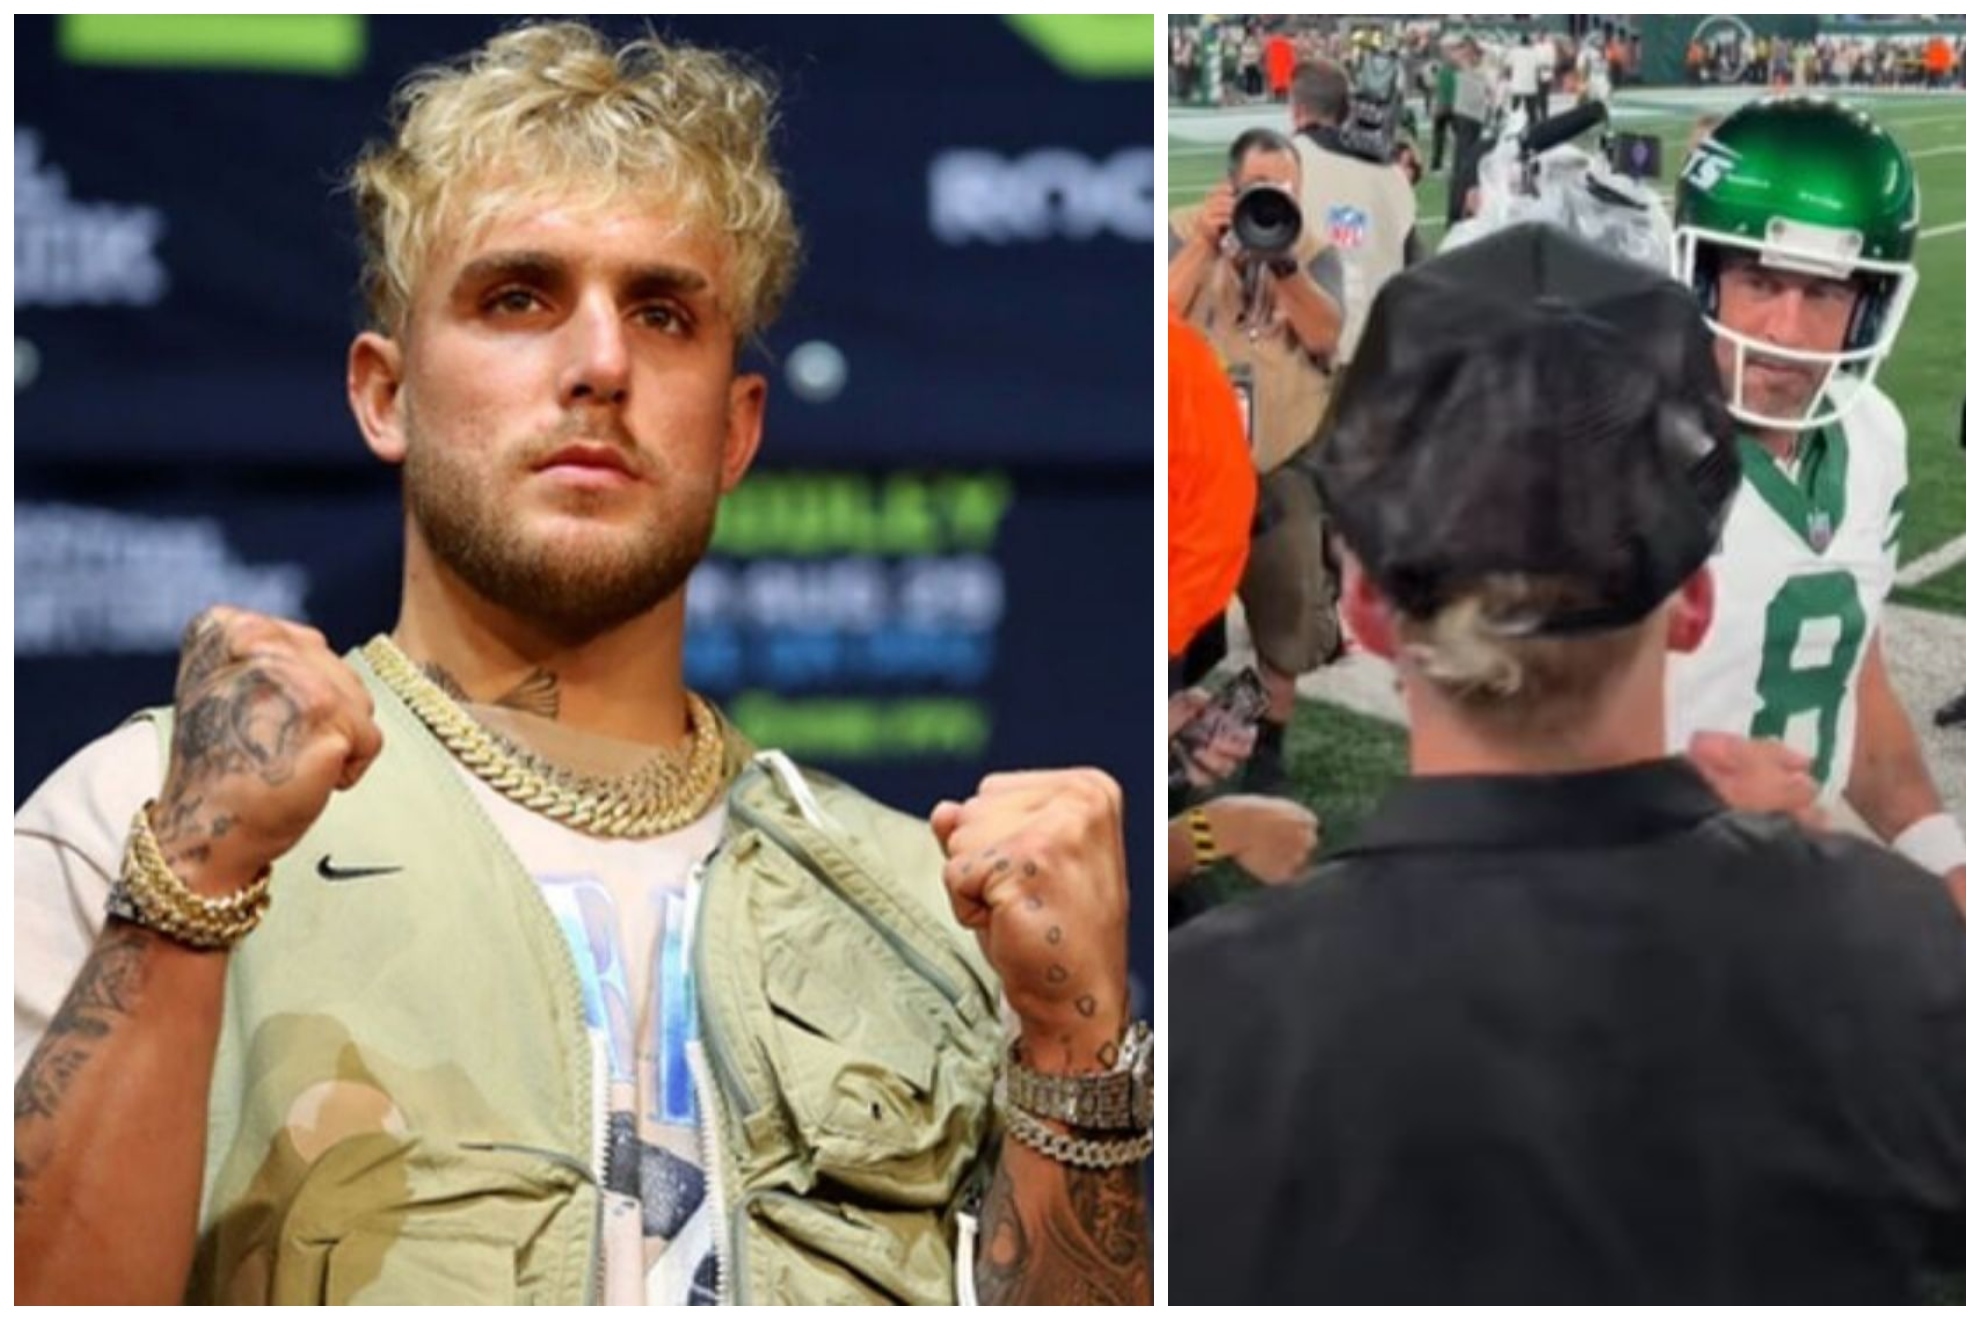 Jake Paul and Aaron Rodgers